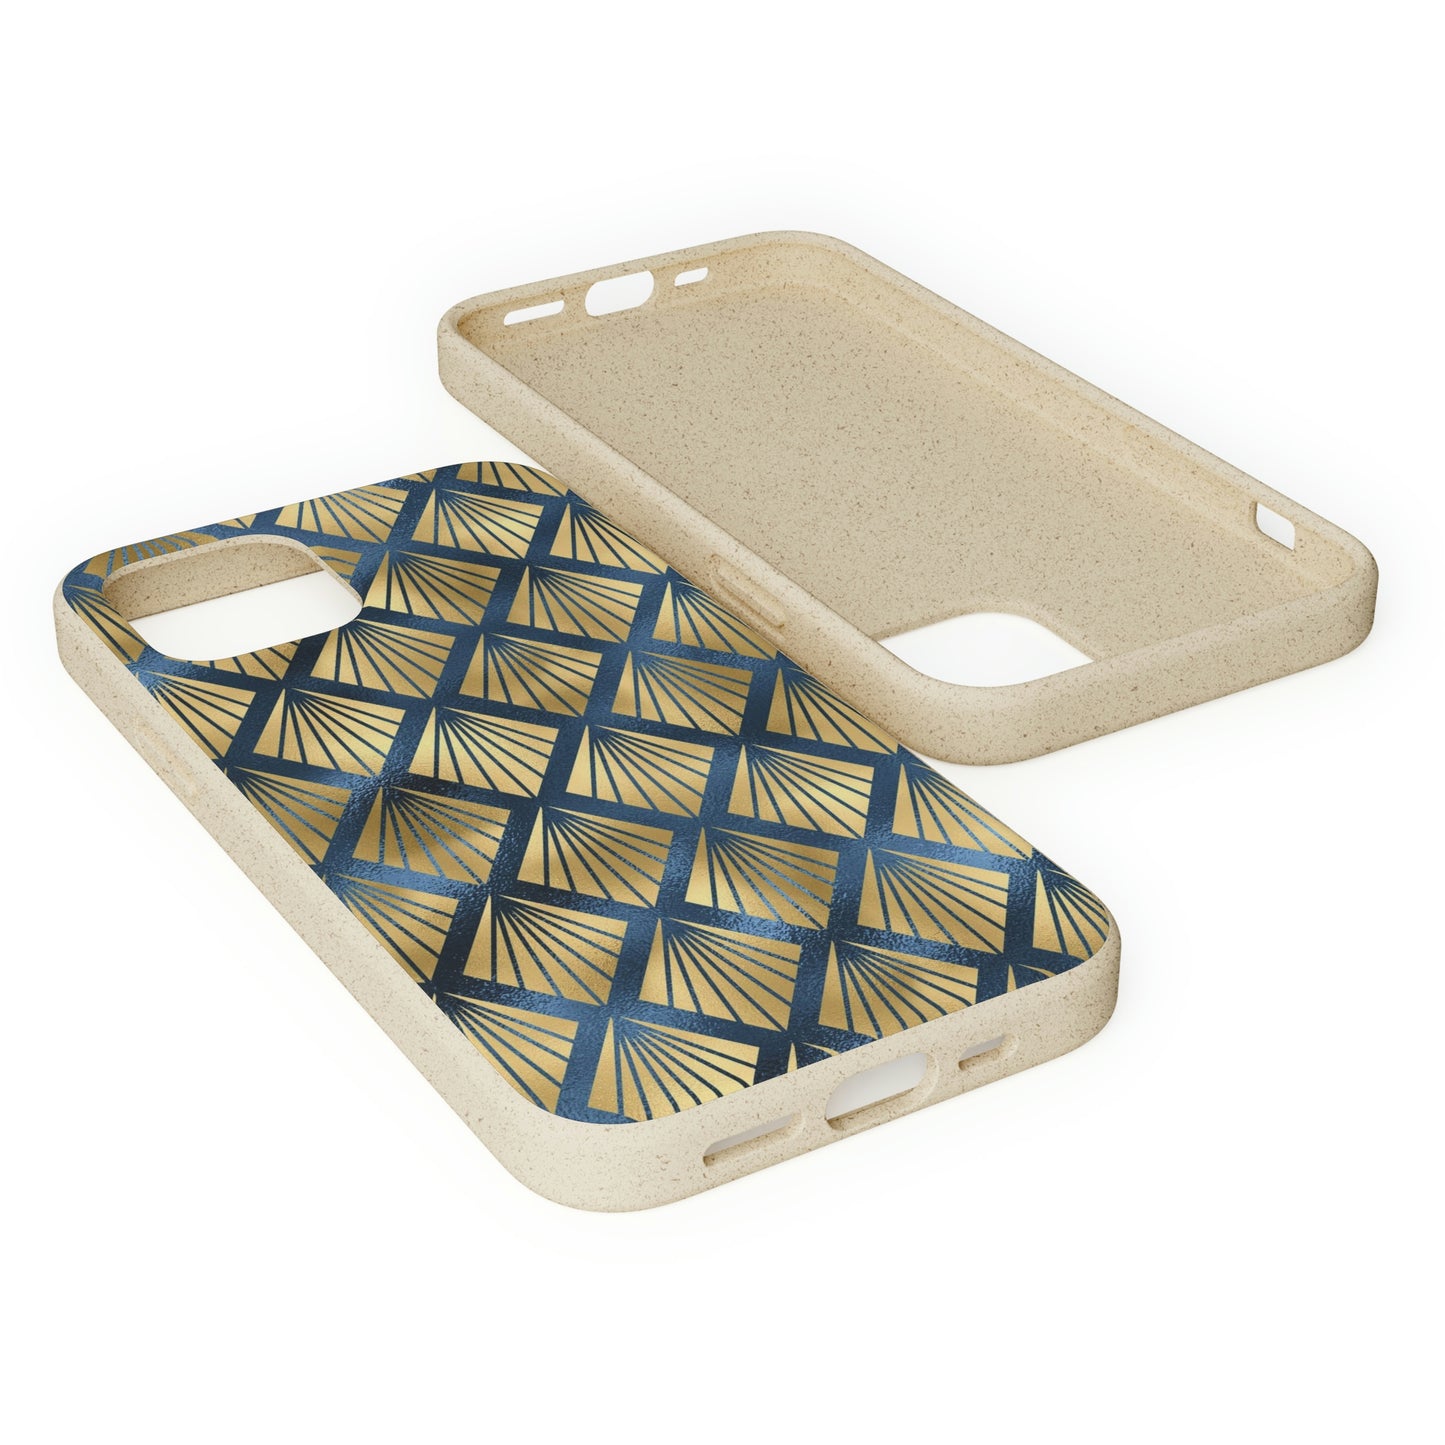 Blue and Gold Eco-Friendly Biodegradable Phone Case: Protect Your Device & the Planet"